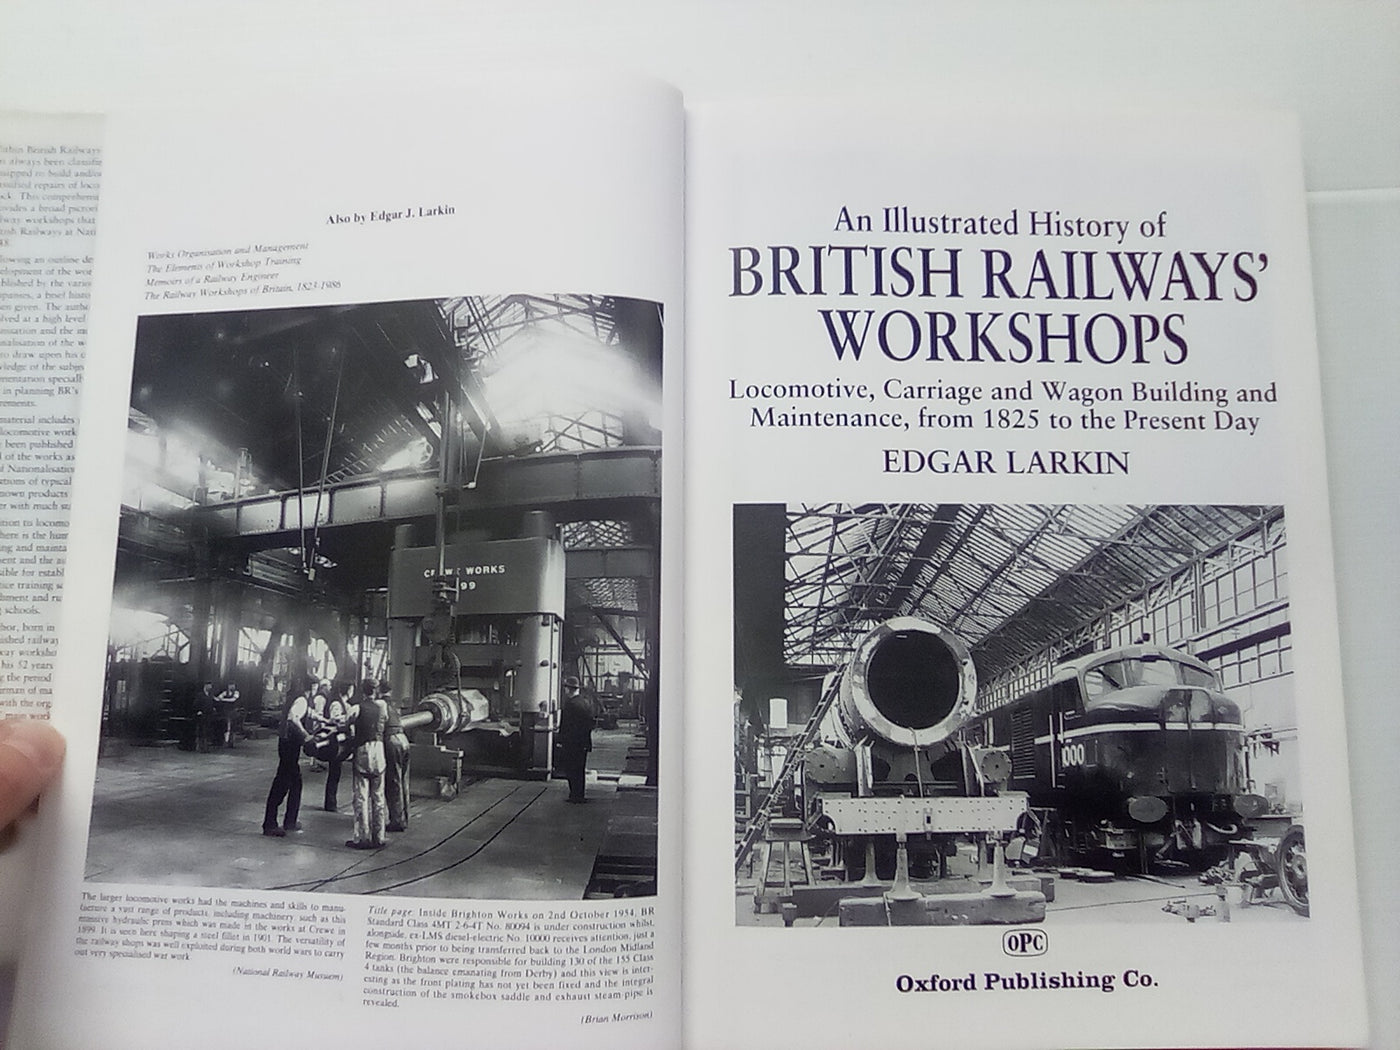 Illustrated History of British Railway Workshops - Locomotive, Carriage and Wagon Building & Maintenance from 1825 to 1992